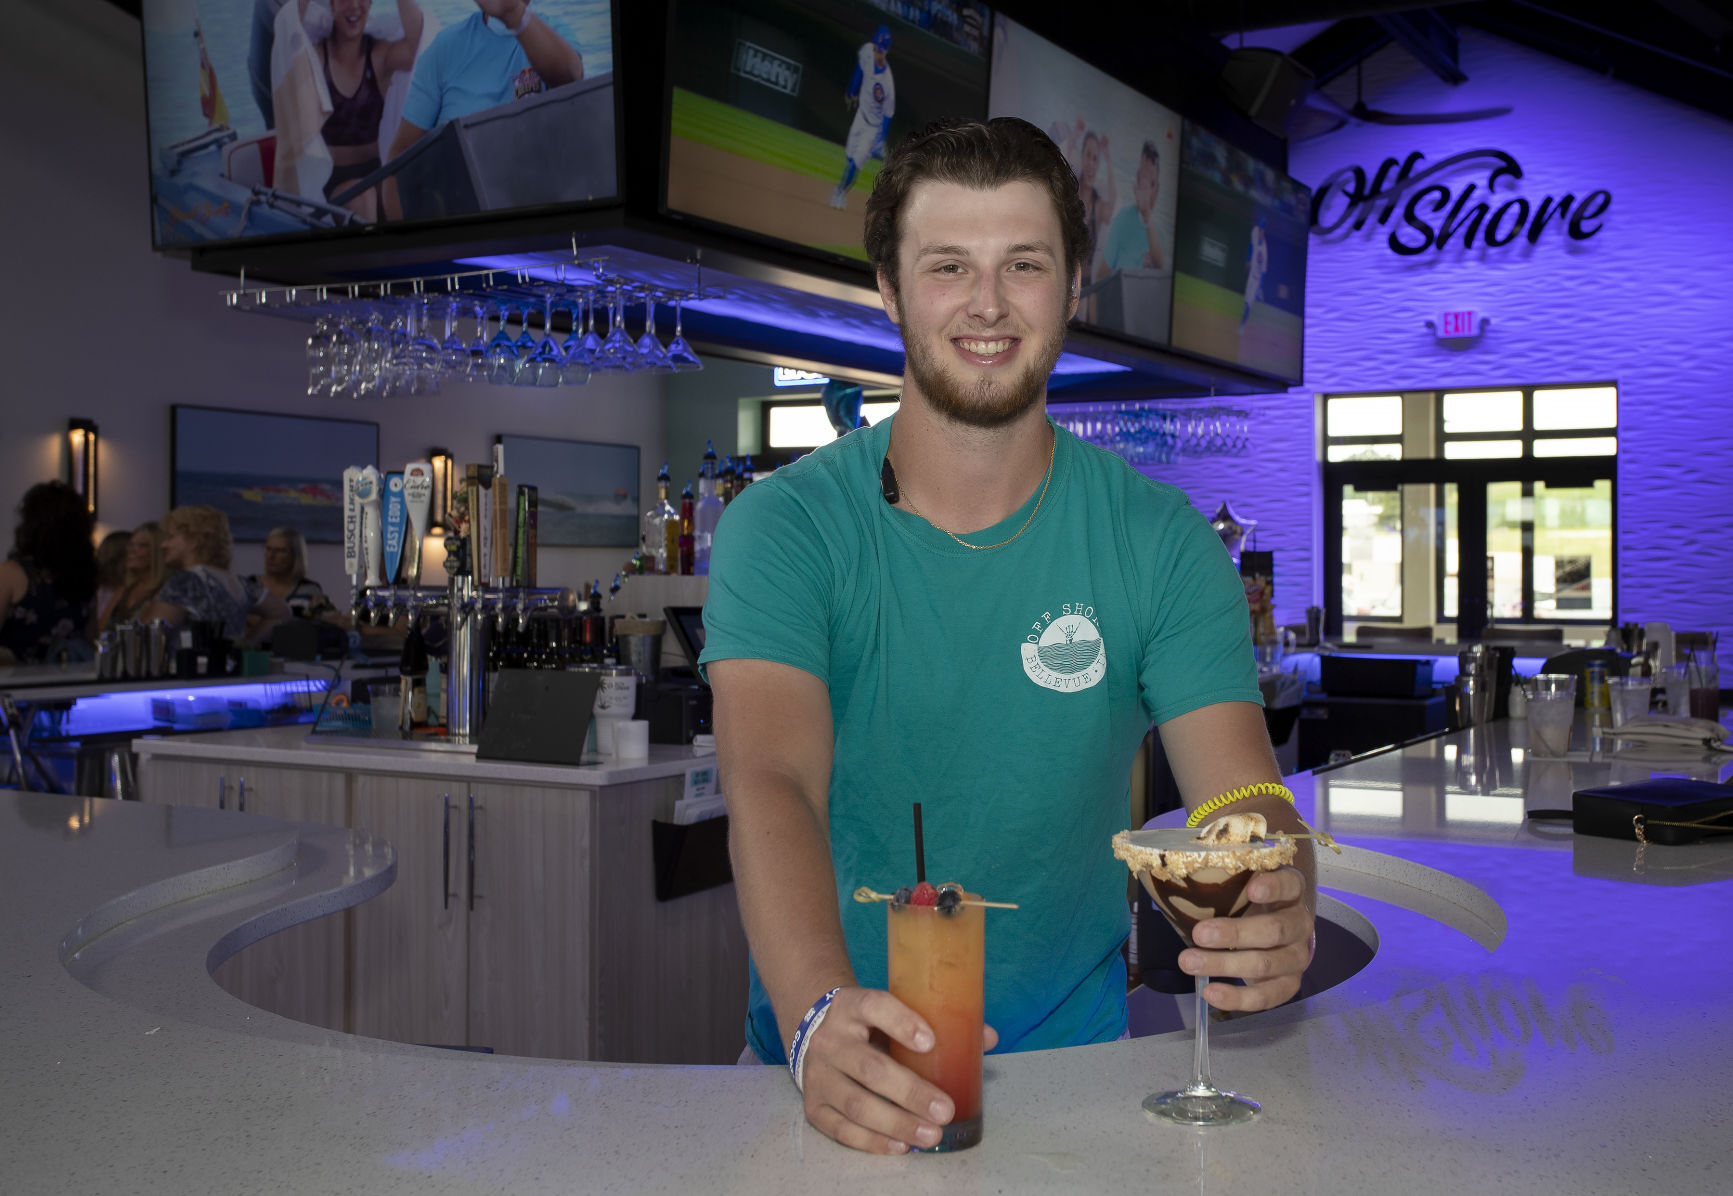 Bartender Aidan Germaine holds two of Off Shore Bar & Grill’s signature drinks — the Cigarette (left) and the Peanut Butter S’mores Martini — in Bellevue, Iowa, on Thursday. PHOTO CREDIT: Stephen Gassman